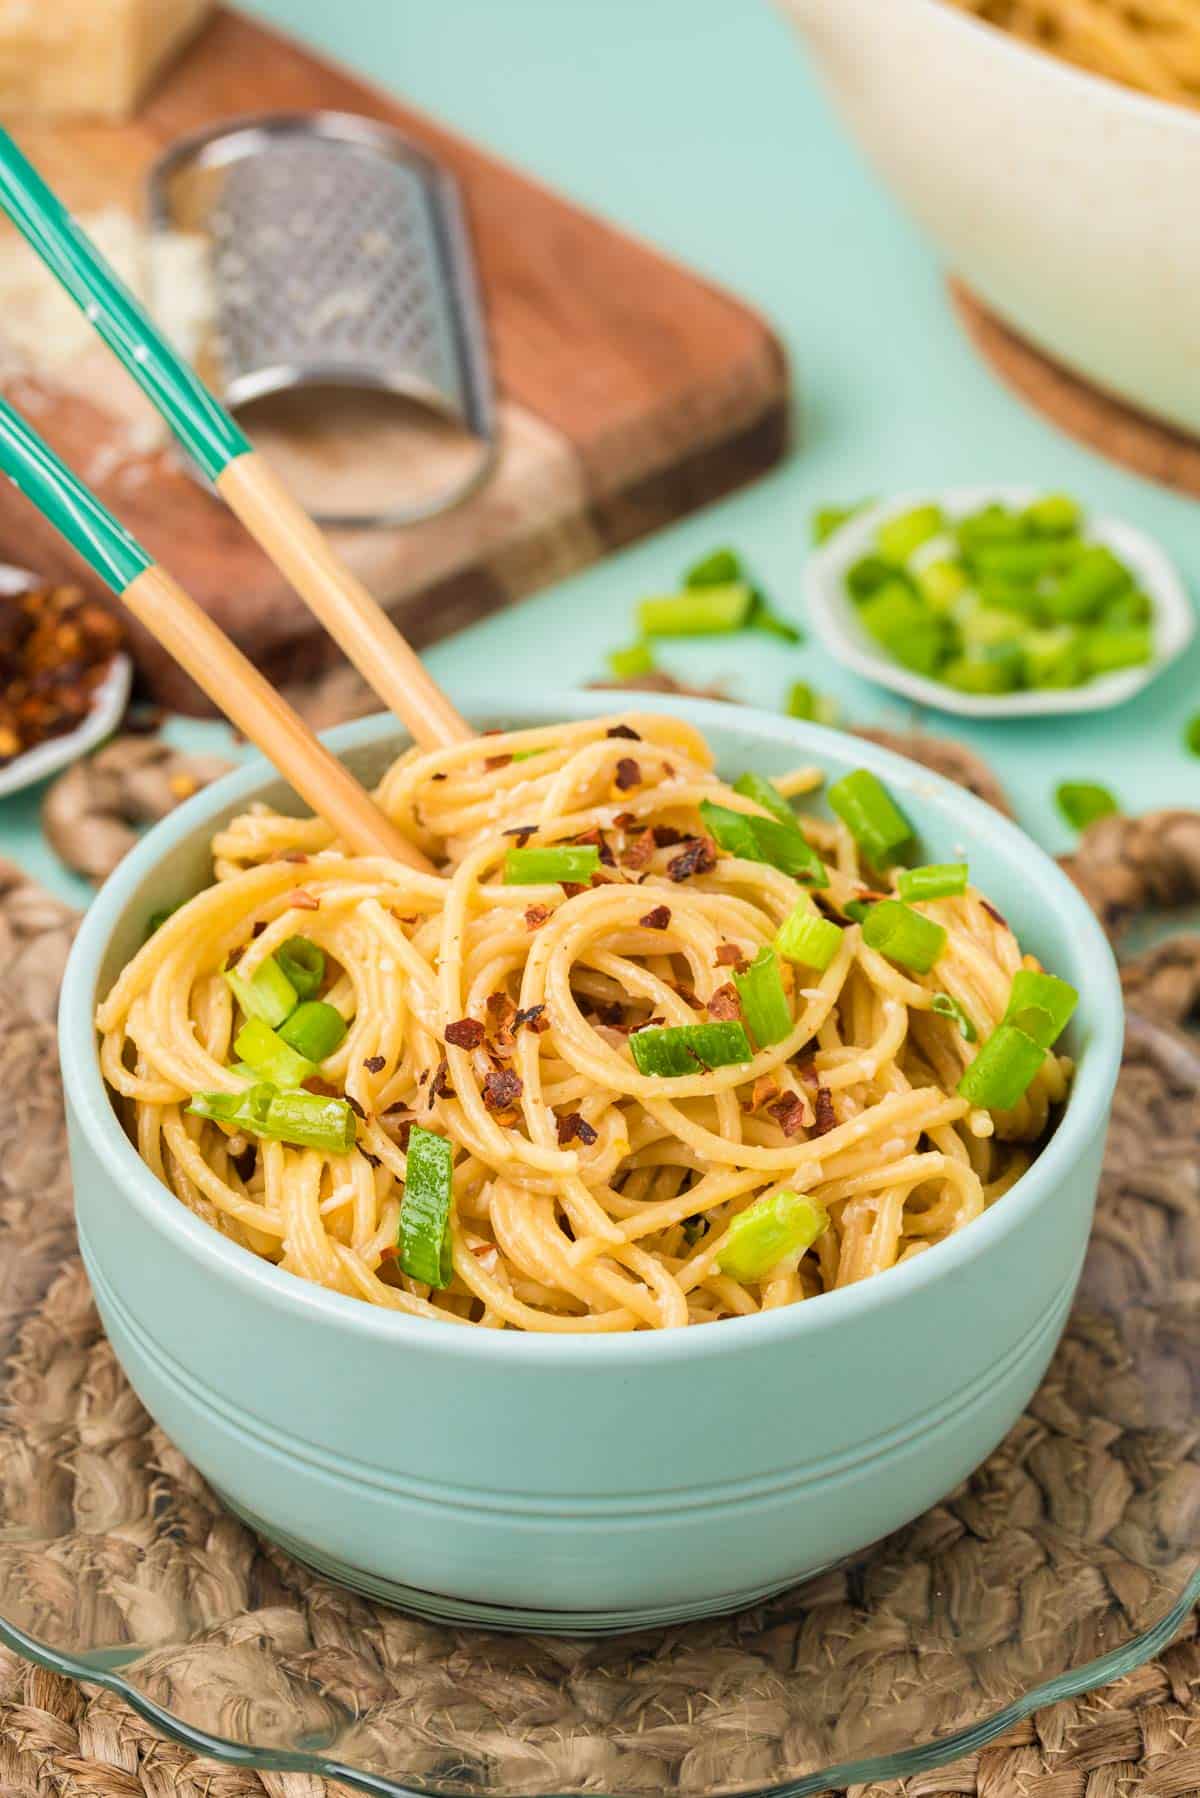 Garlic noodles in a blue bowl on a plate.